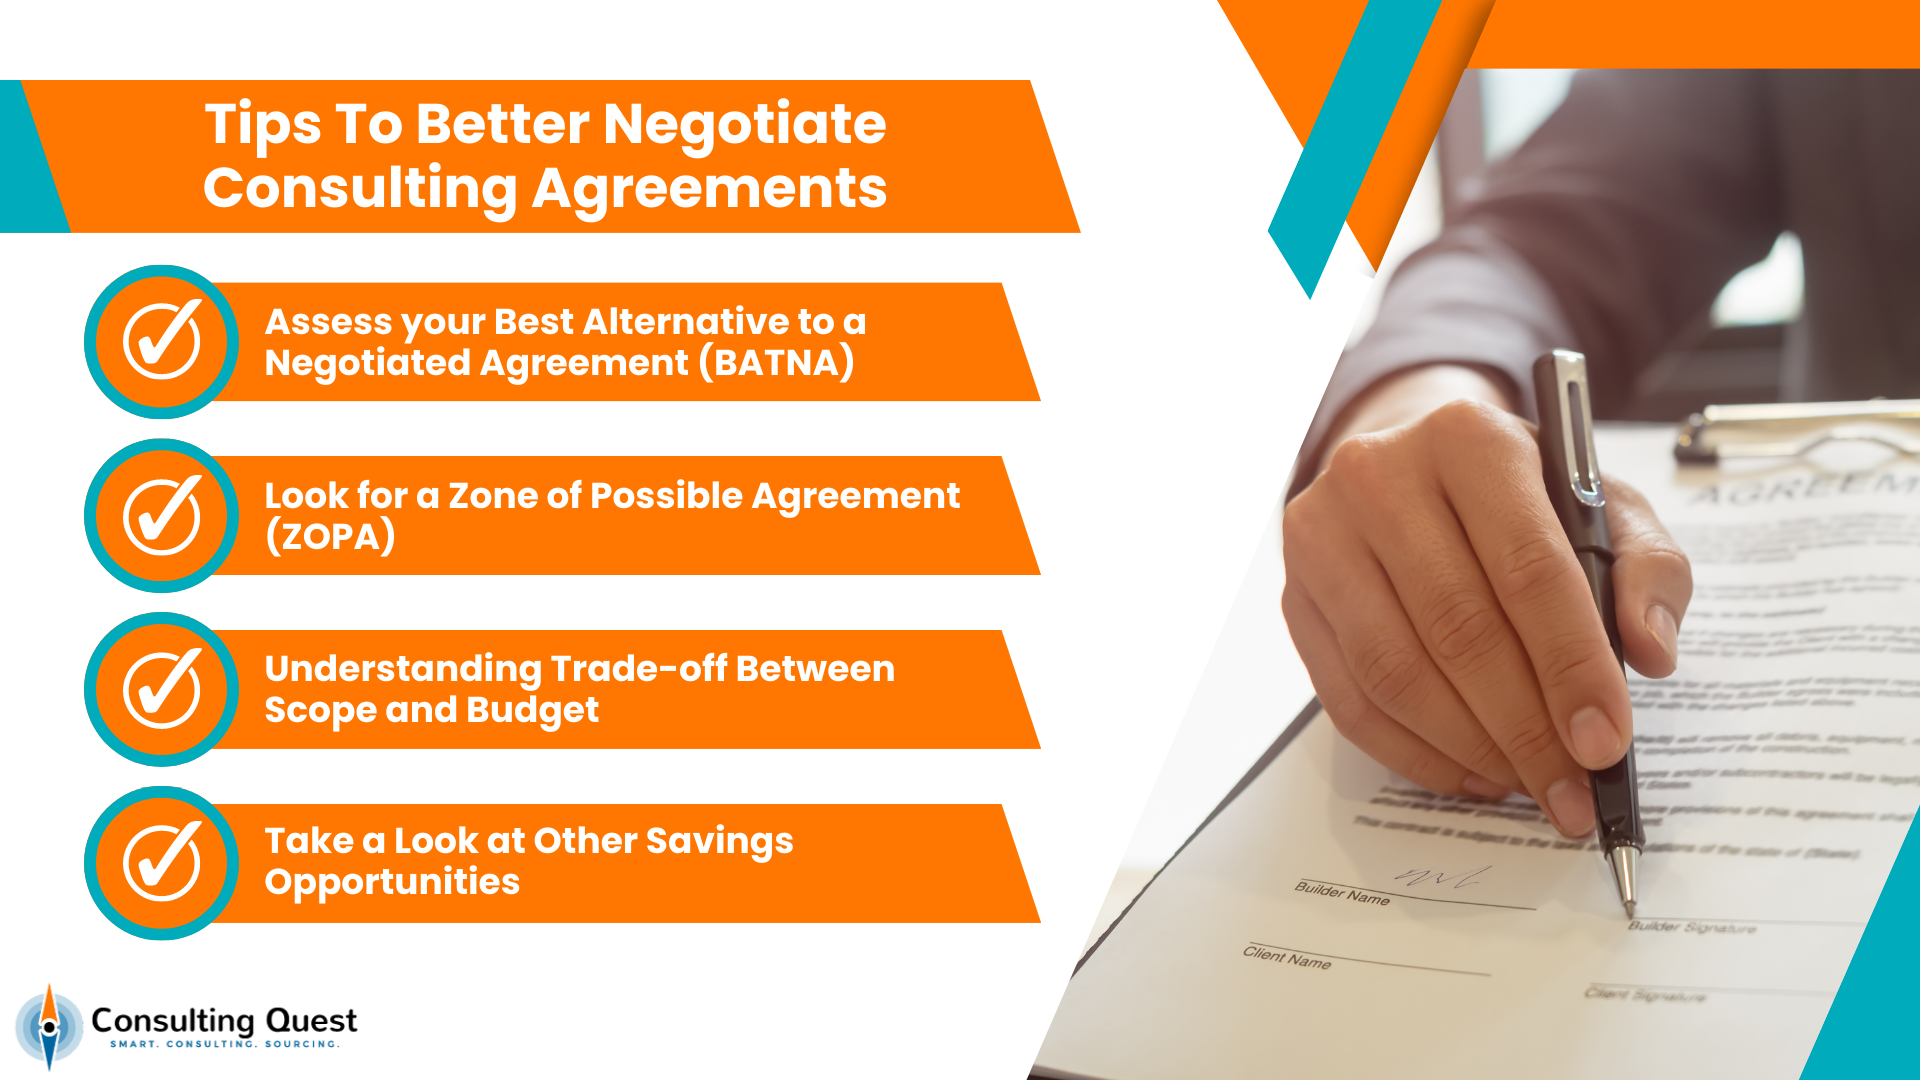 Tips To Better Negotiate Consulting Agreements